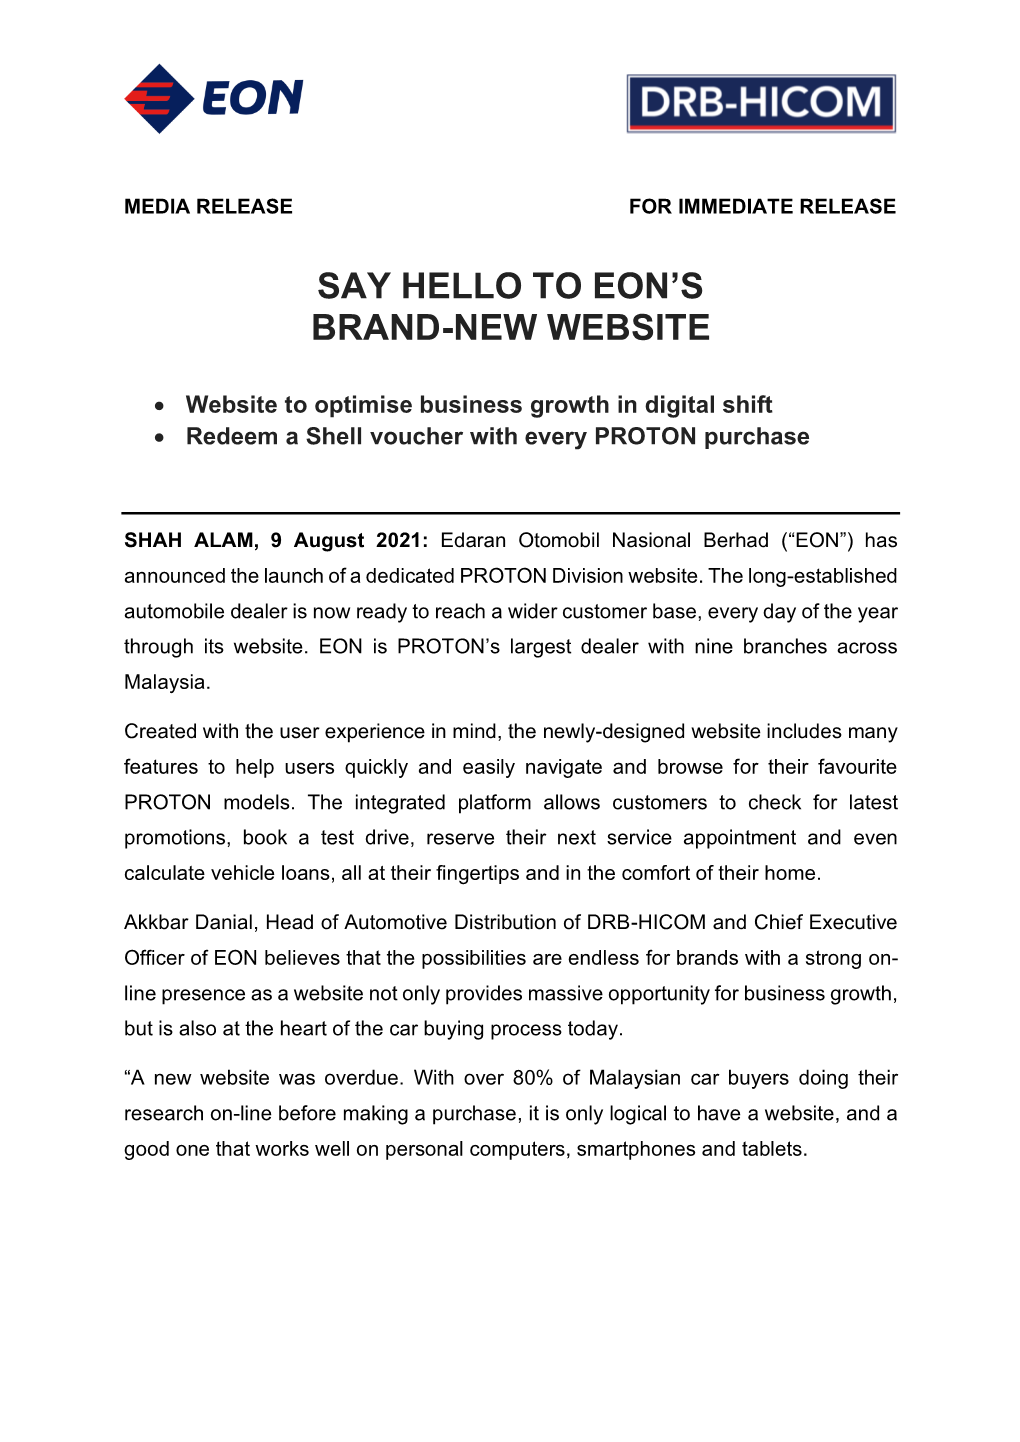 Say Hello to Eon's Brand-New Website